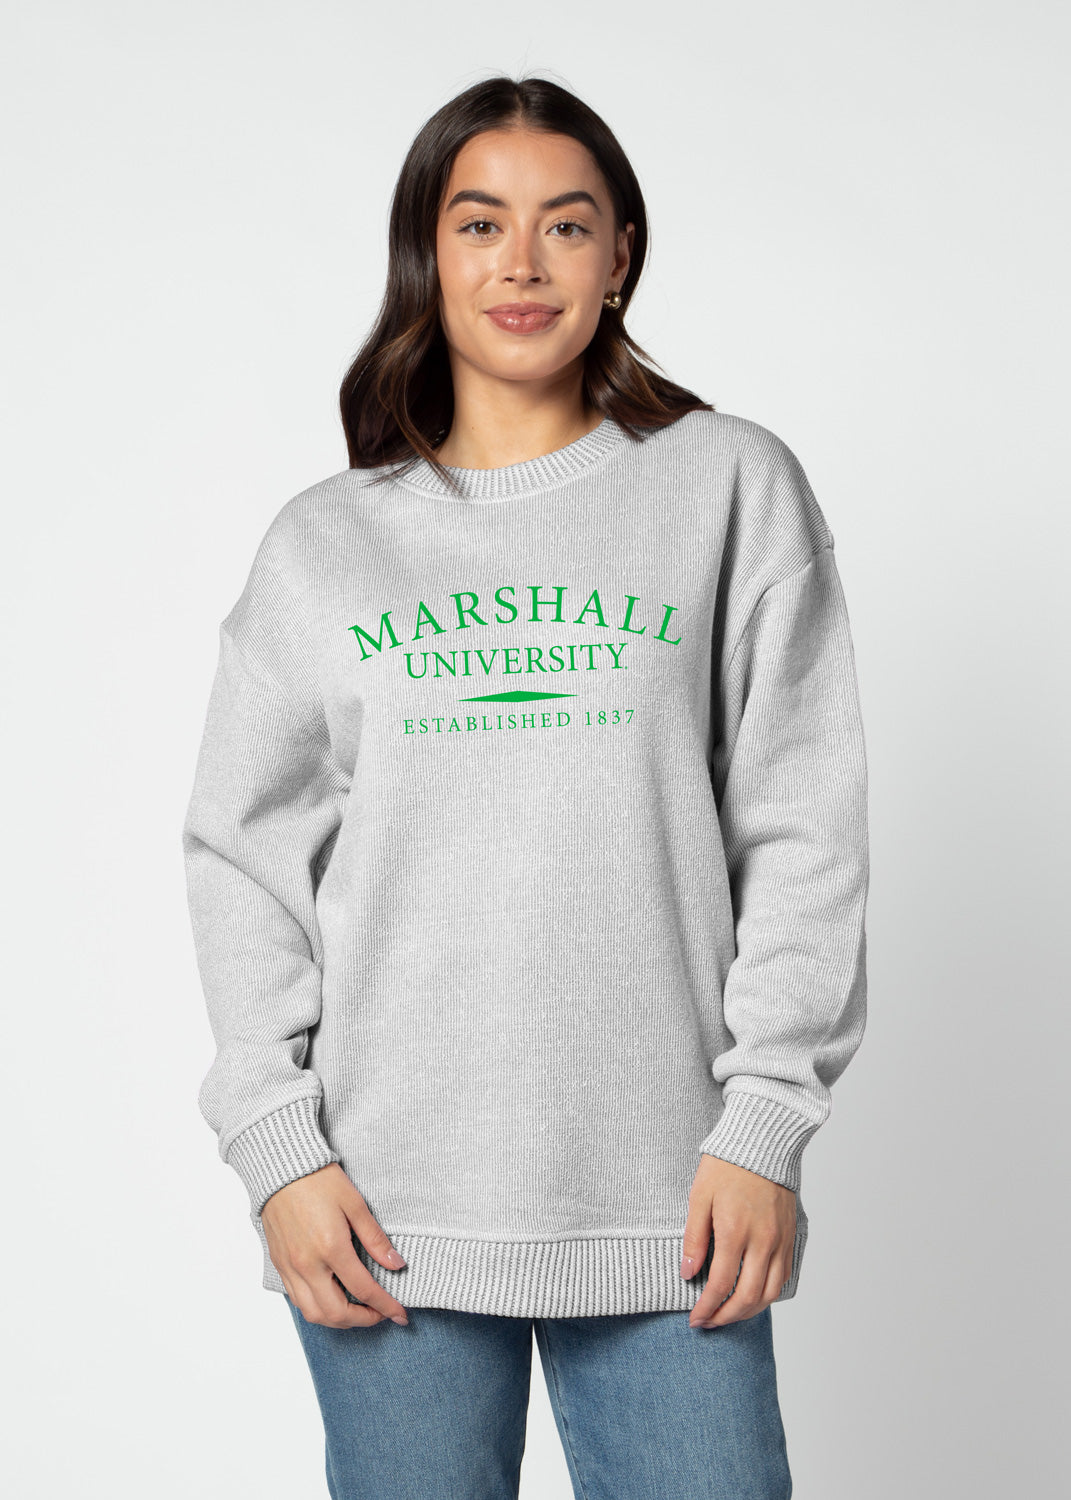 a model faces the camera wearing a pullover sweater reading Marshall university established 1837